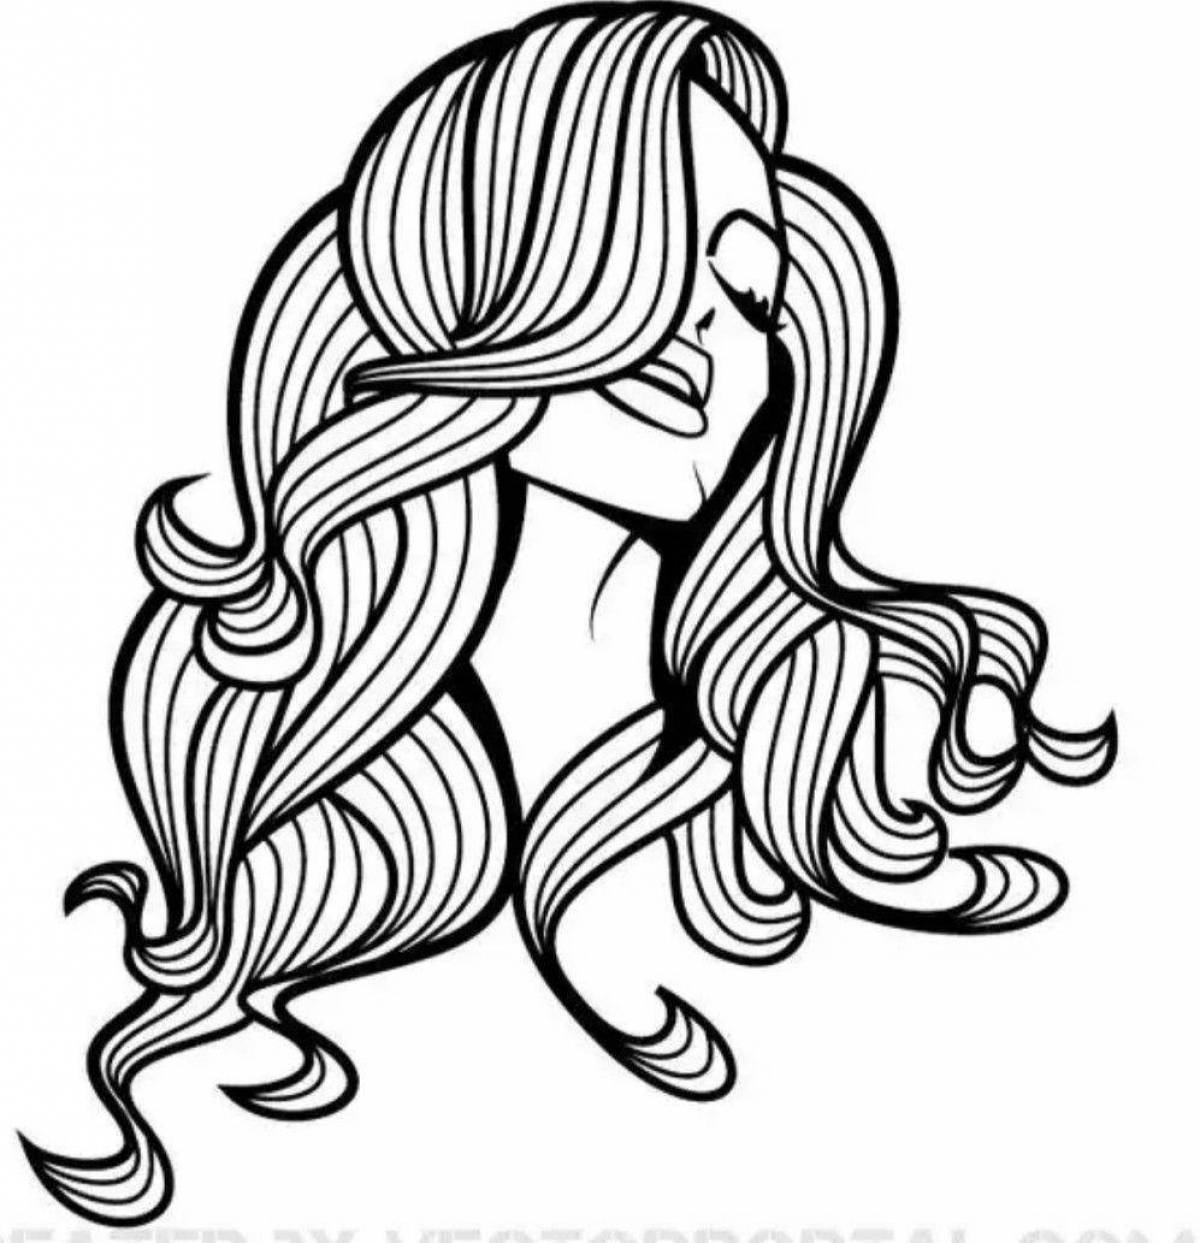 Charming coloring of a girl with long hair